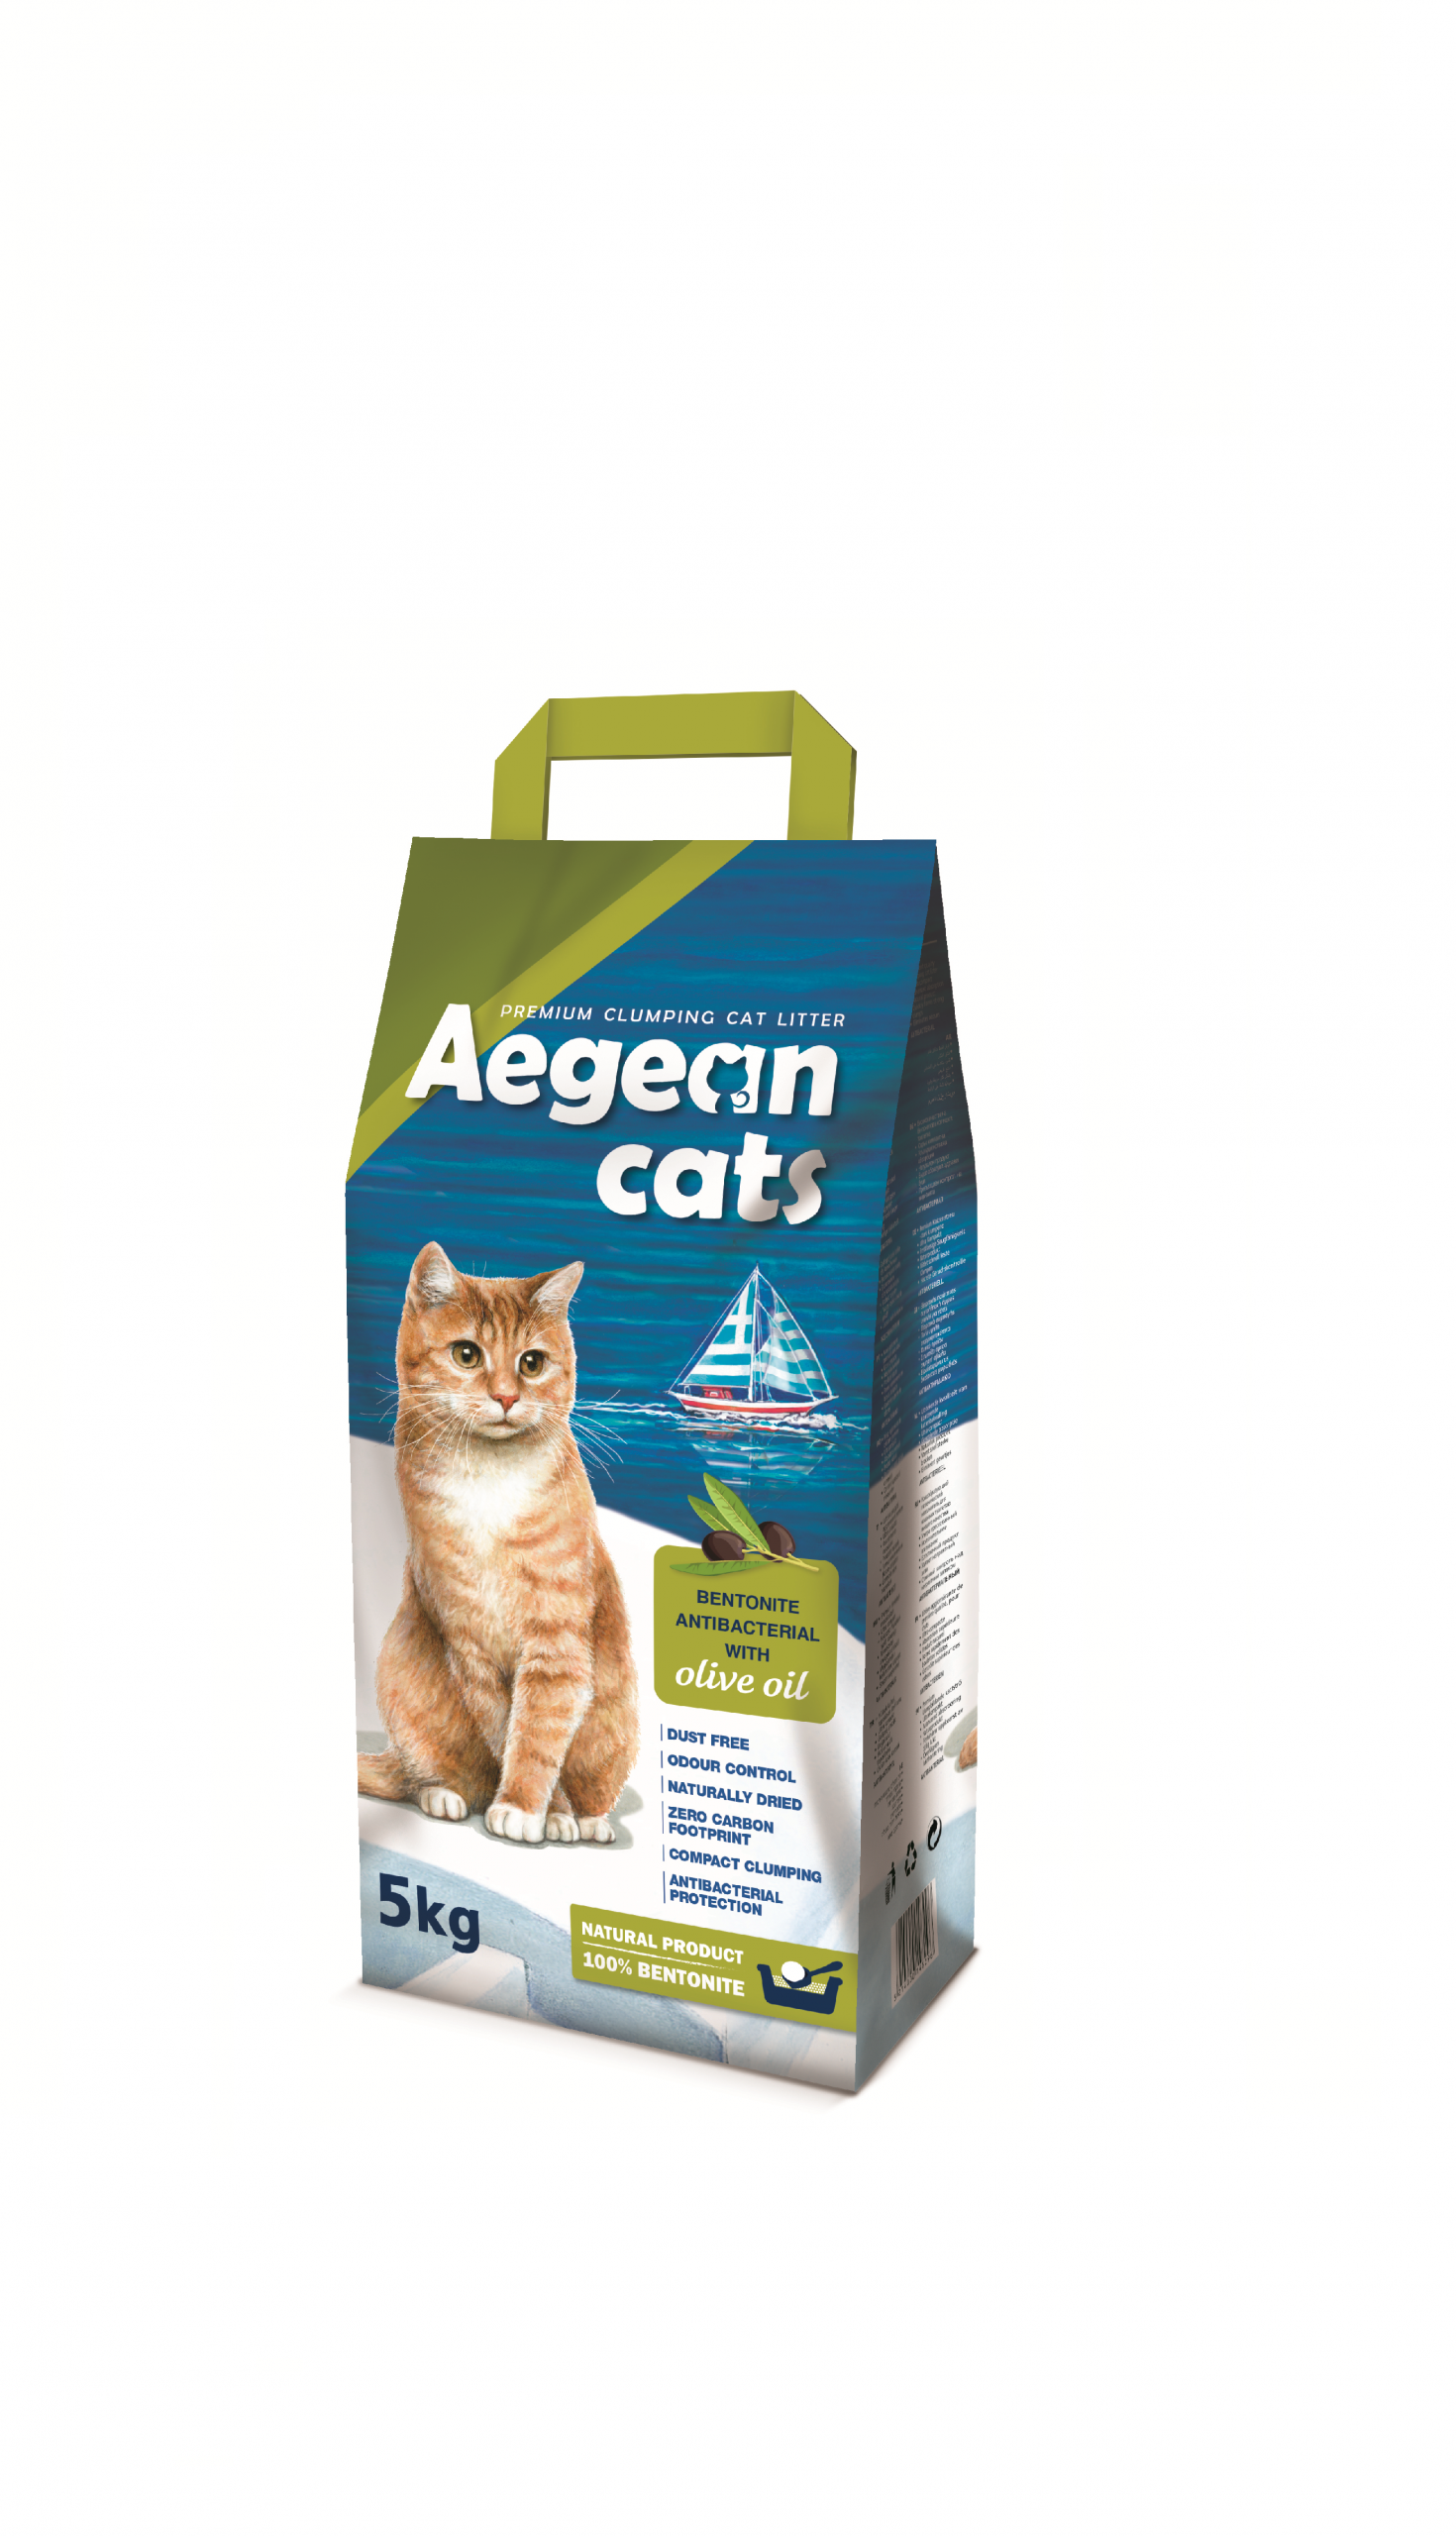 Aegean Cats Natural Cat Litter (5kg) perfurmed with olive oil